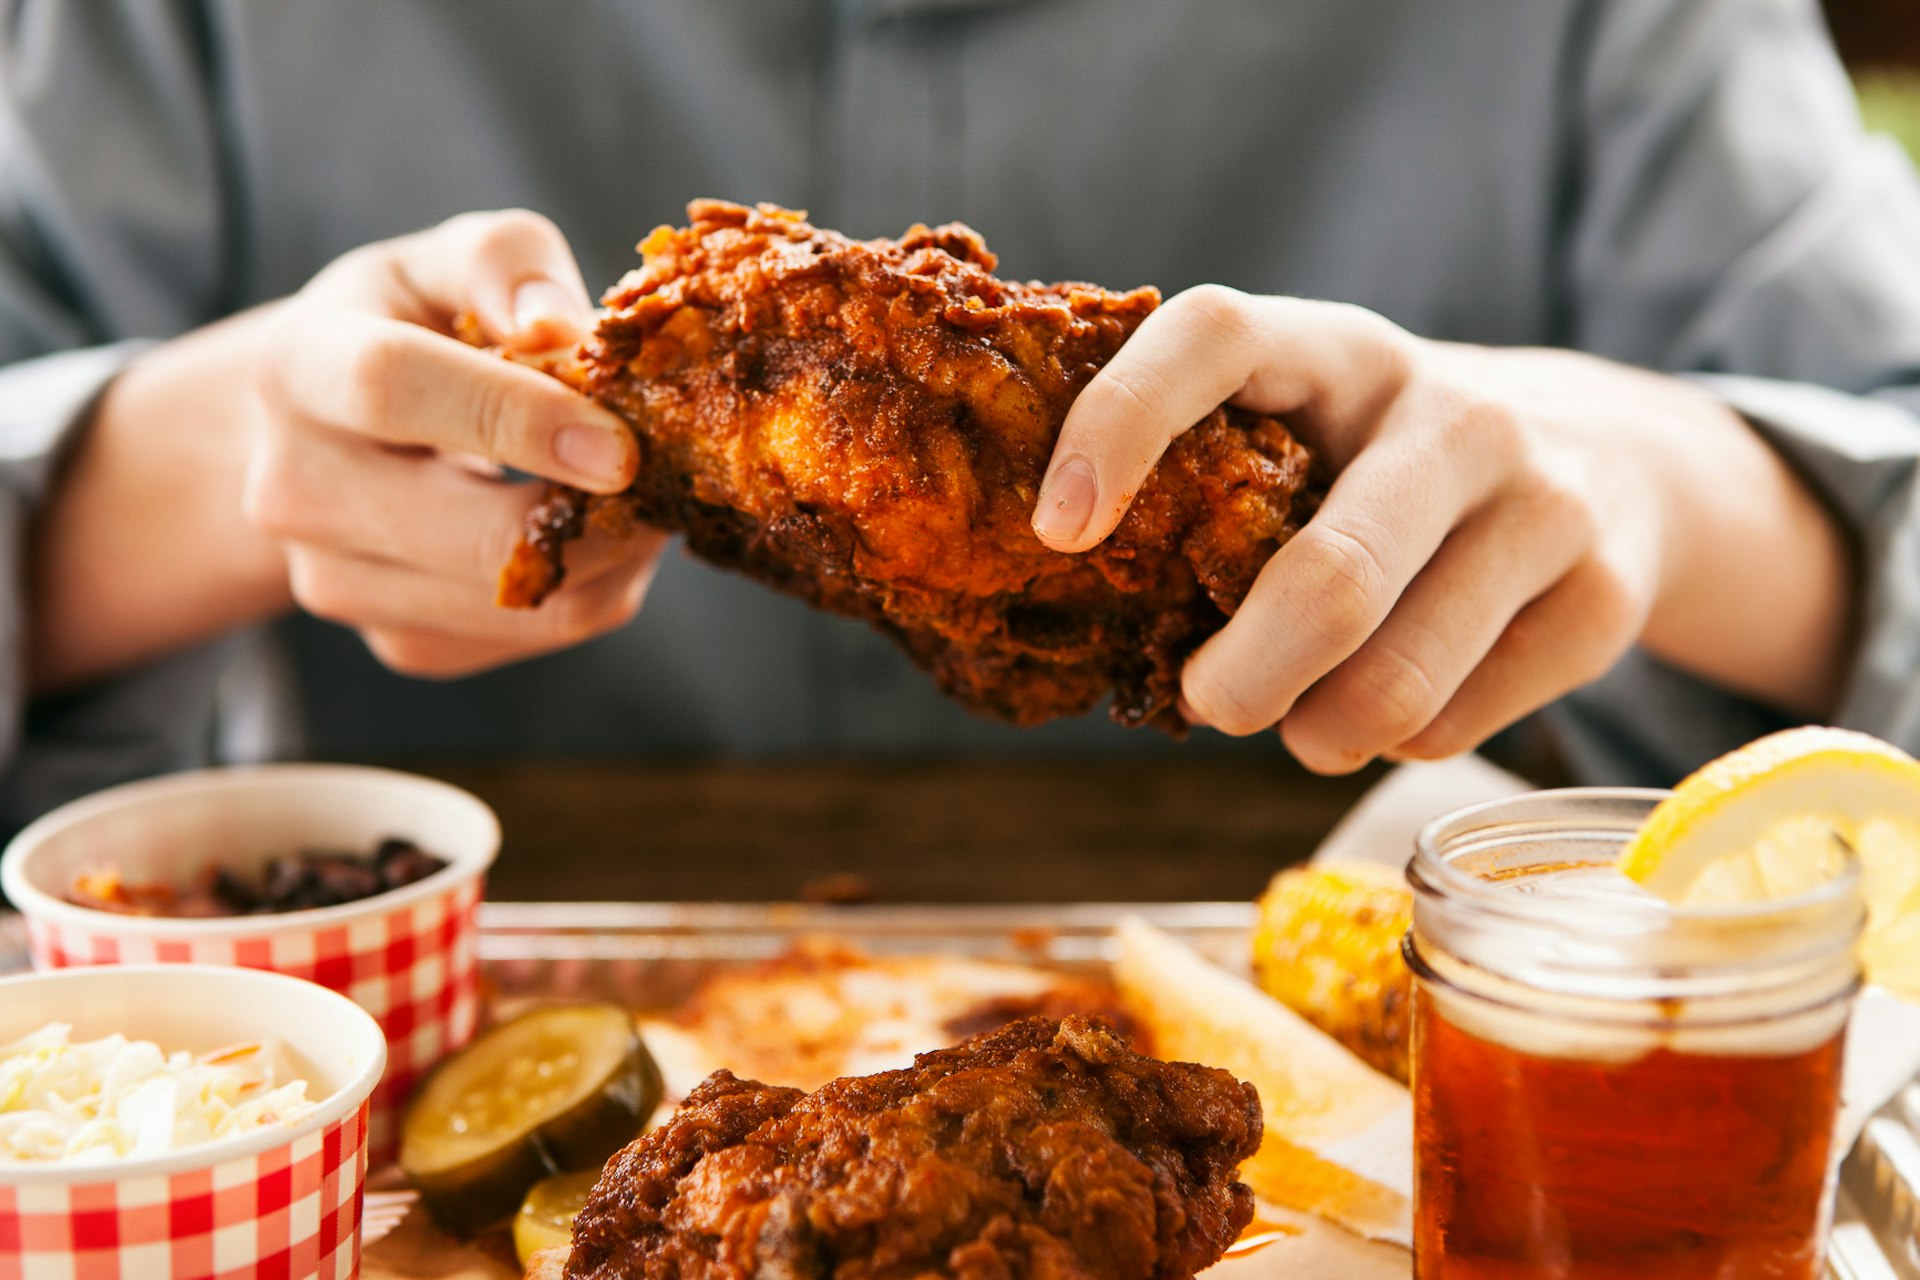 Fried: Man Digging In To Hot Chicken Meal